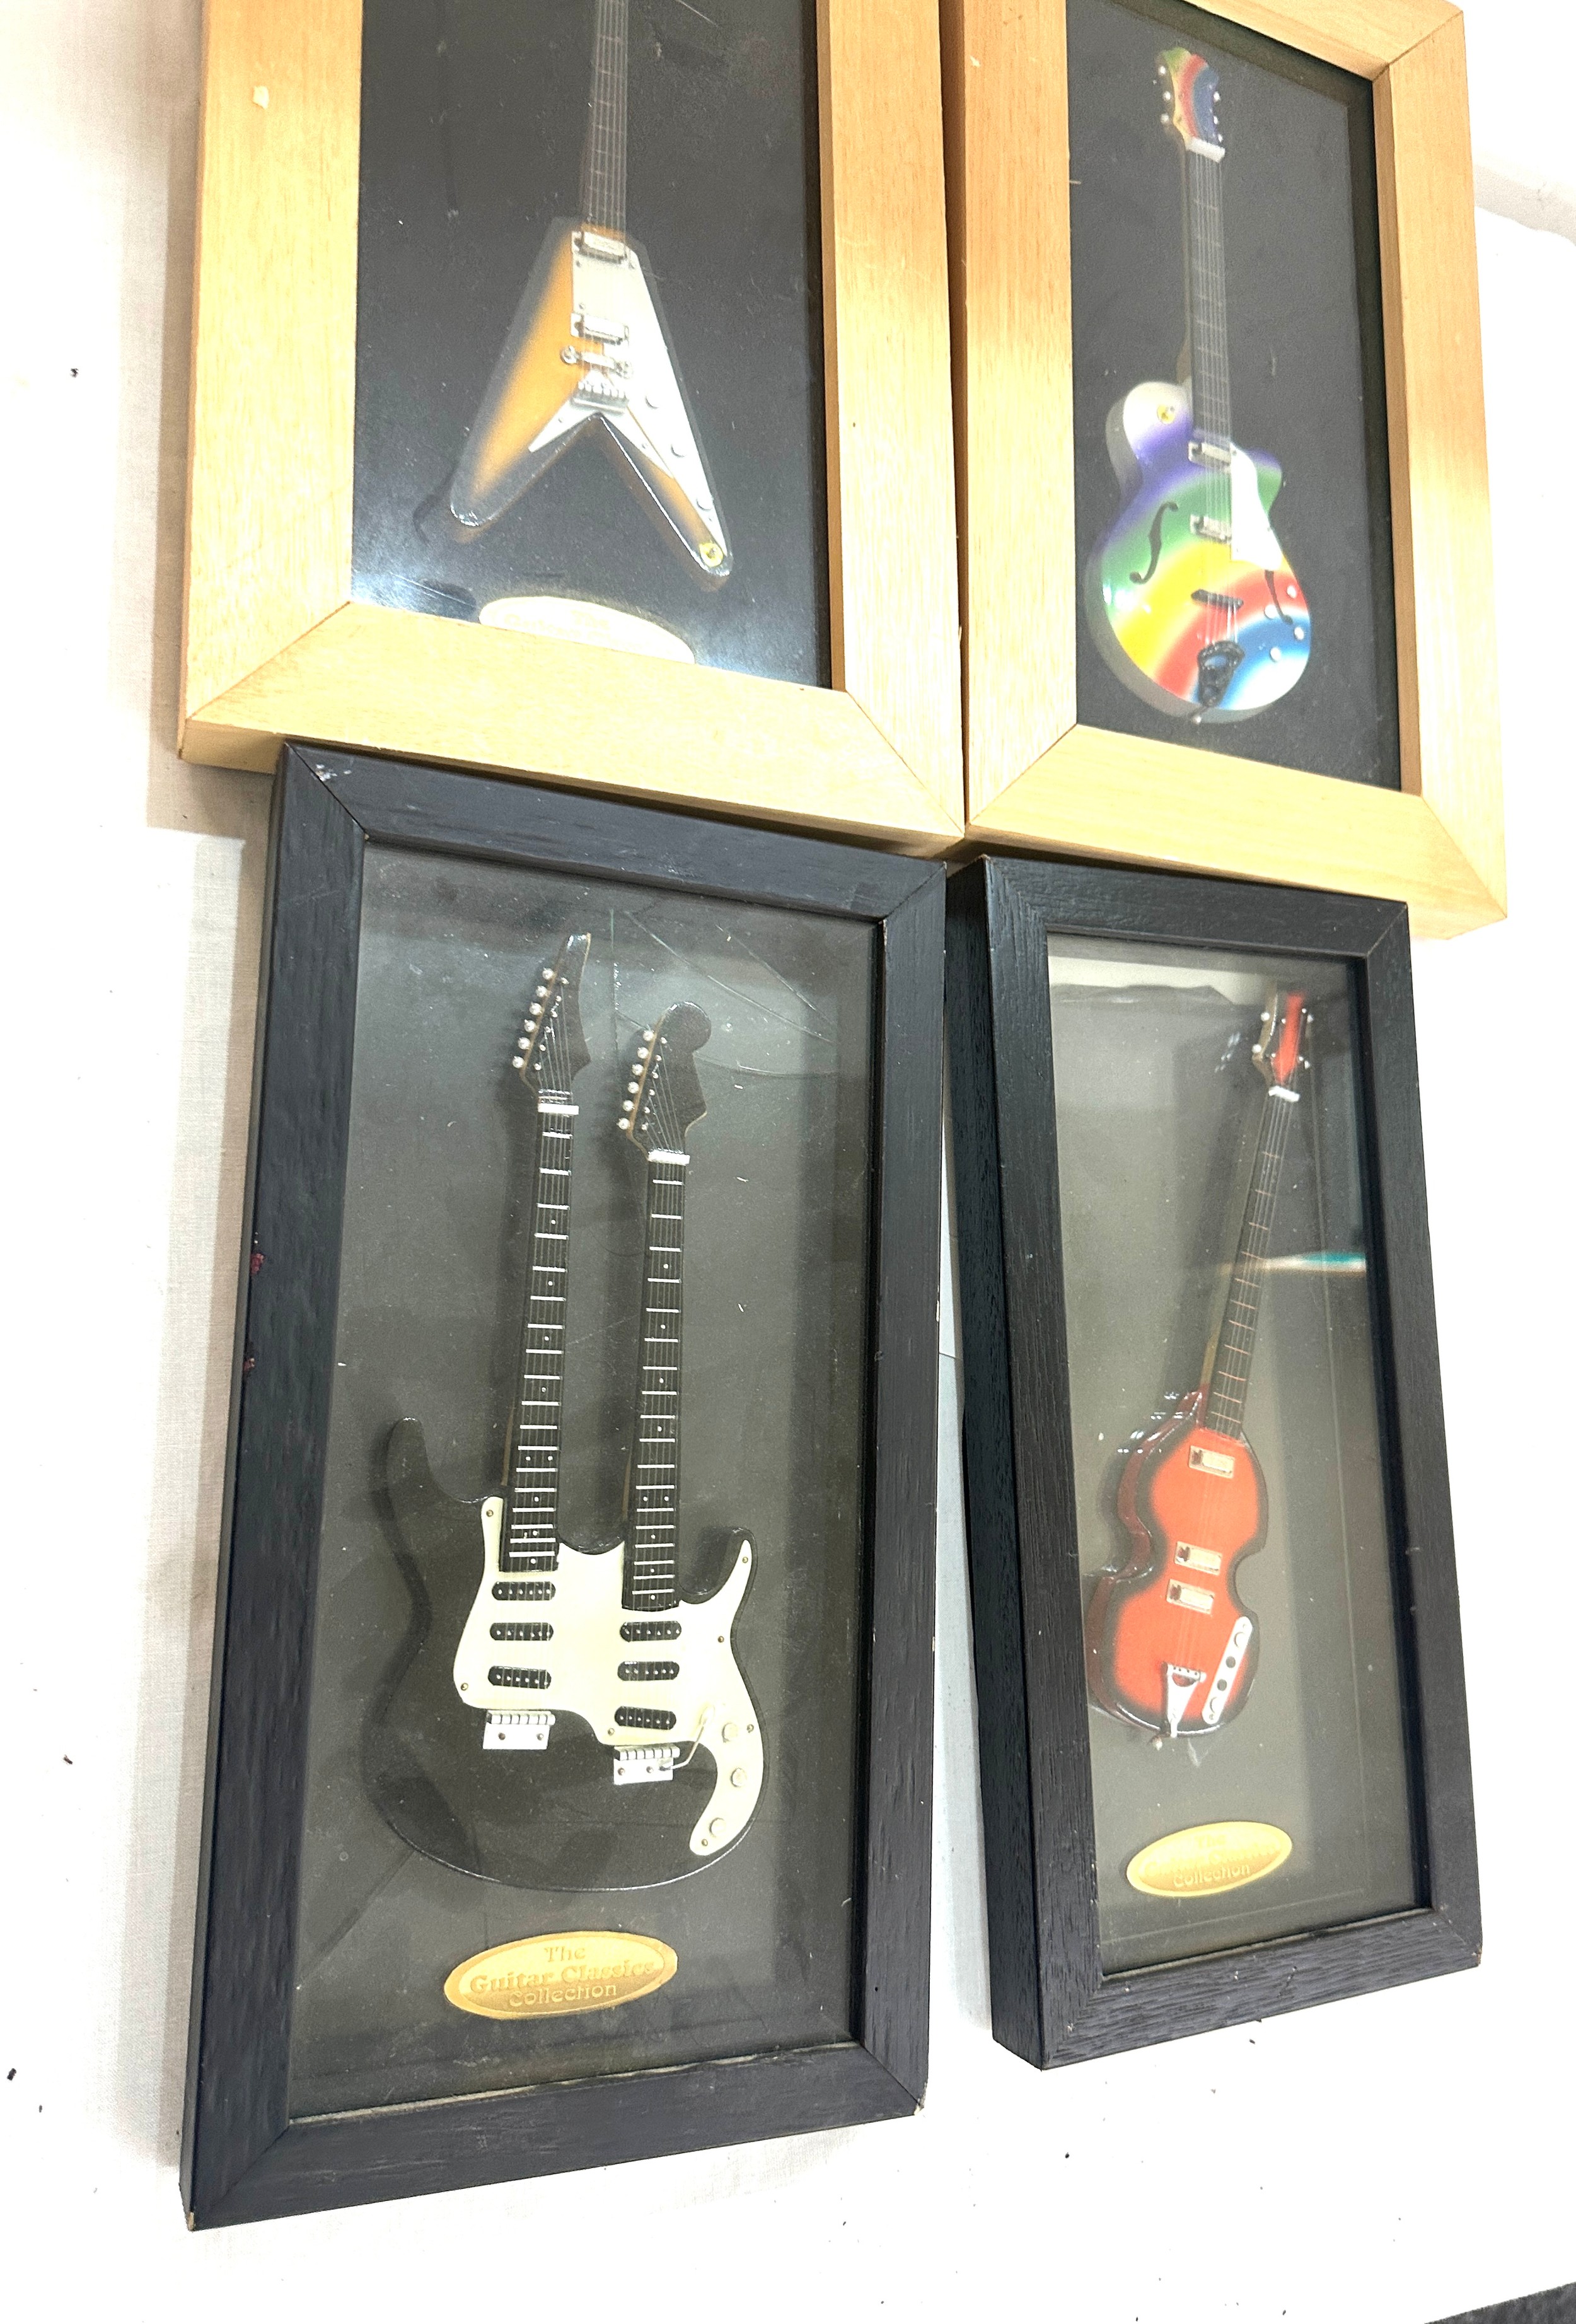 Four framed guitar models two from the Classic guitar collection tallest measures 14 inches